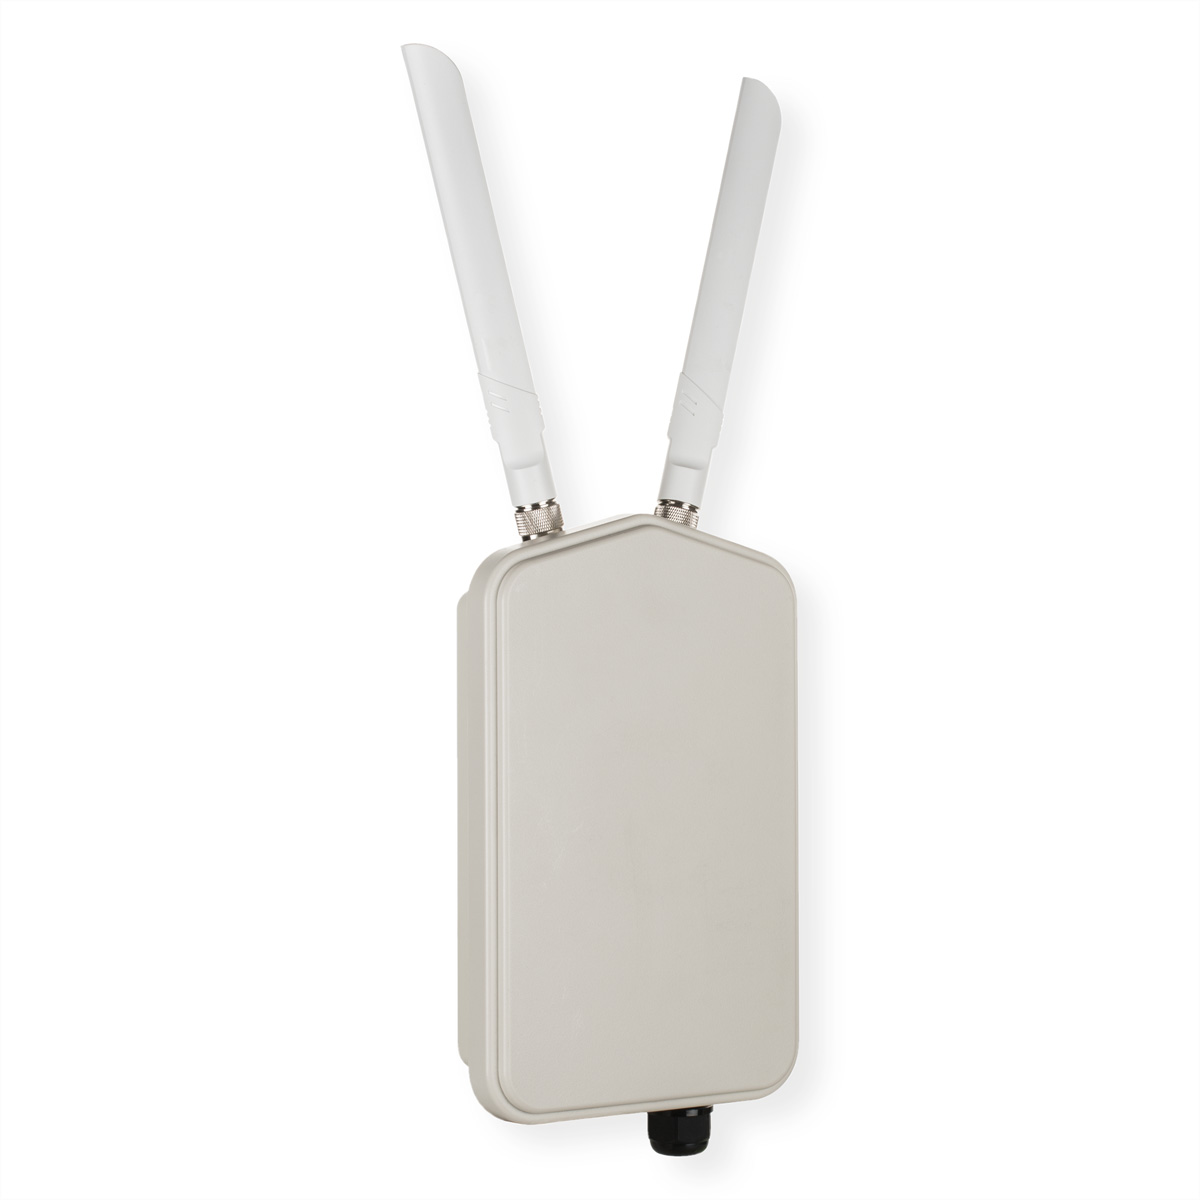 D-Link DWL-8720AP Outdoor Access Point Unified  AC1300 Wave 2 Dual Band